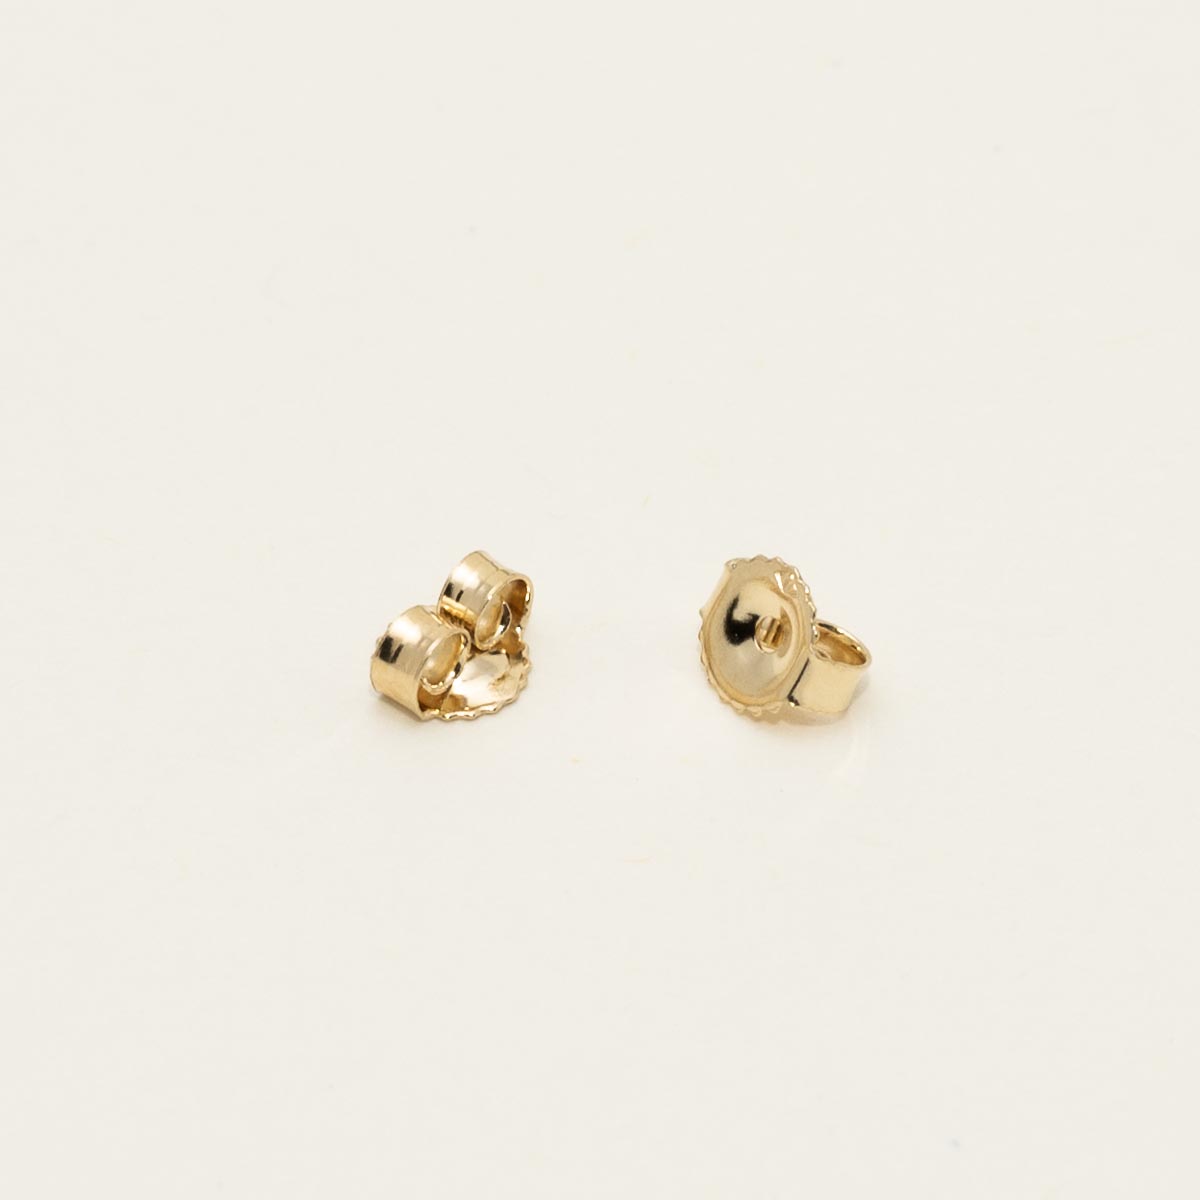 Mastoloni Cultured Freshwater Pearl Stud Earrings in 14kt Yellow Gold (5.5-6mm pearls)